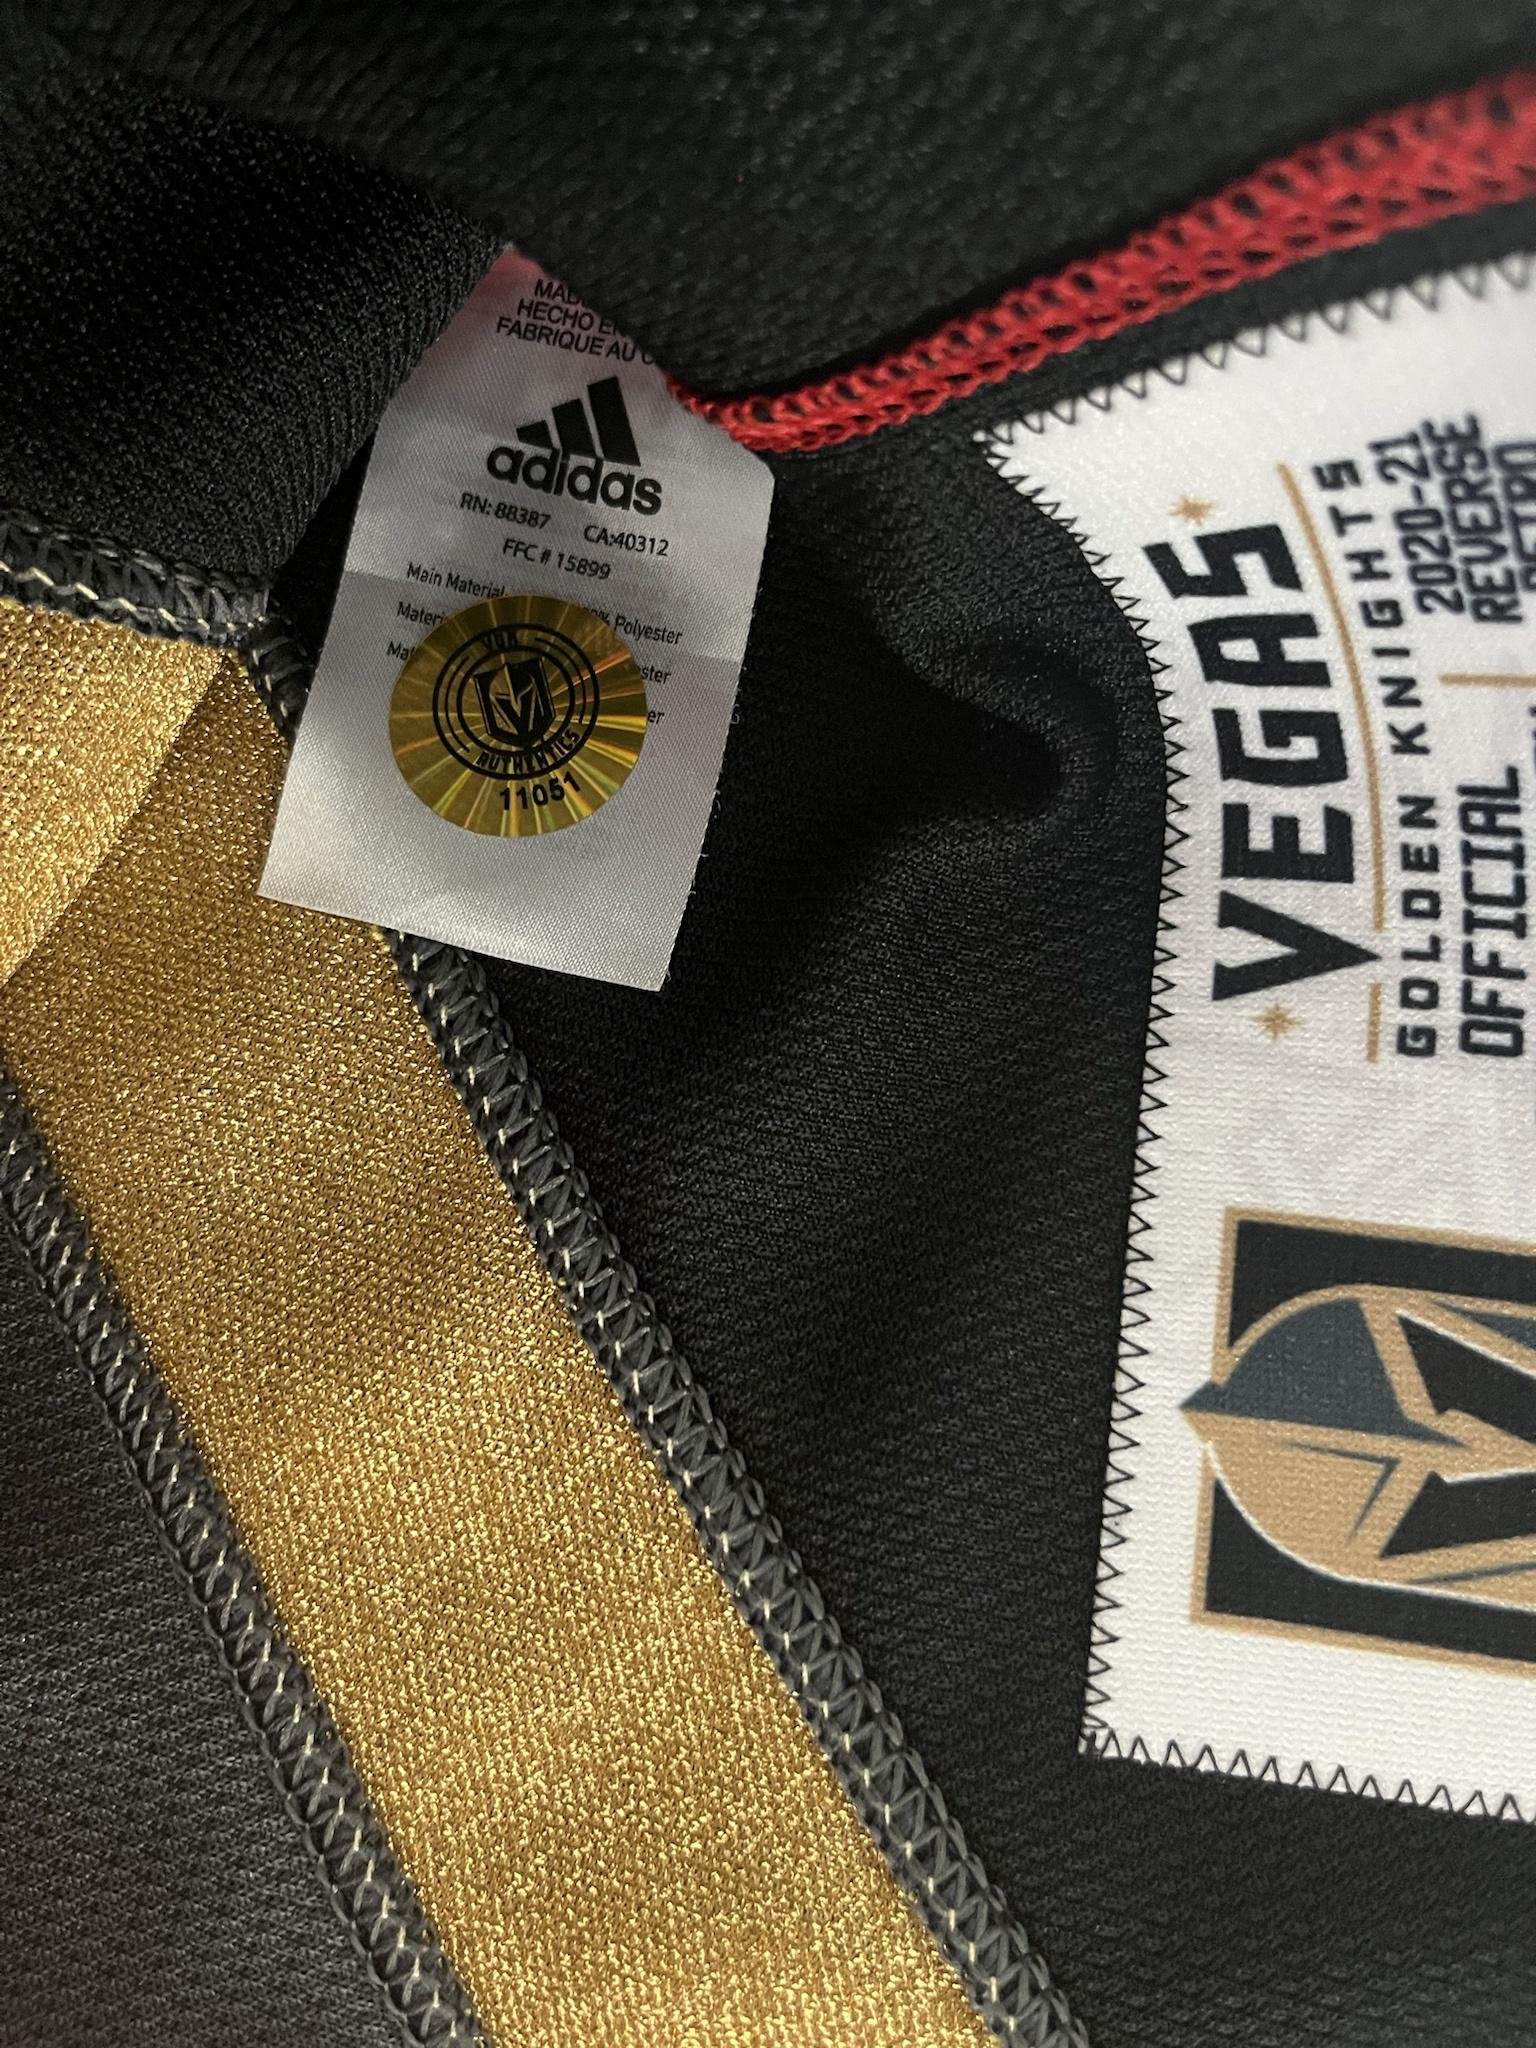 Finally starting my collection. Love the Reverse Retro! : r/goldenknights